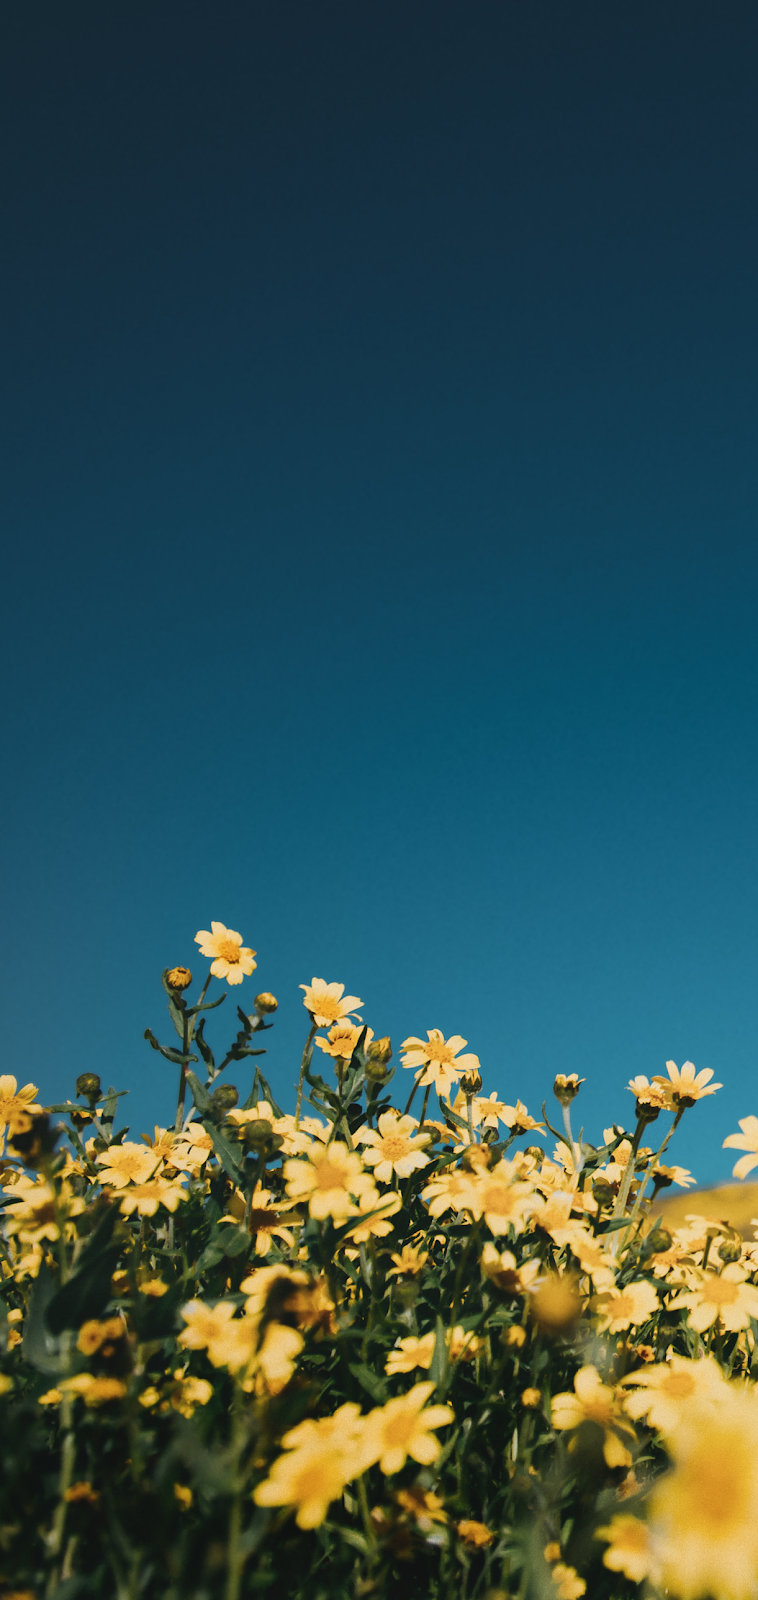 Yellow flowers in the blue sky The Effective Picture We Offer You About winter flowers A quality pi. Blue sky wallpaper, Blue flower wallpaper, Yellow flowers